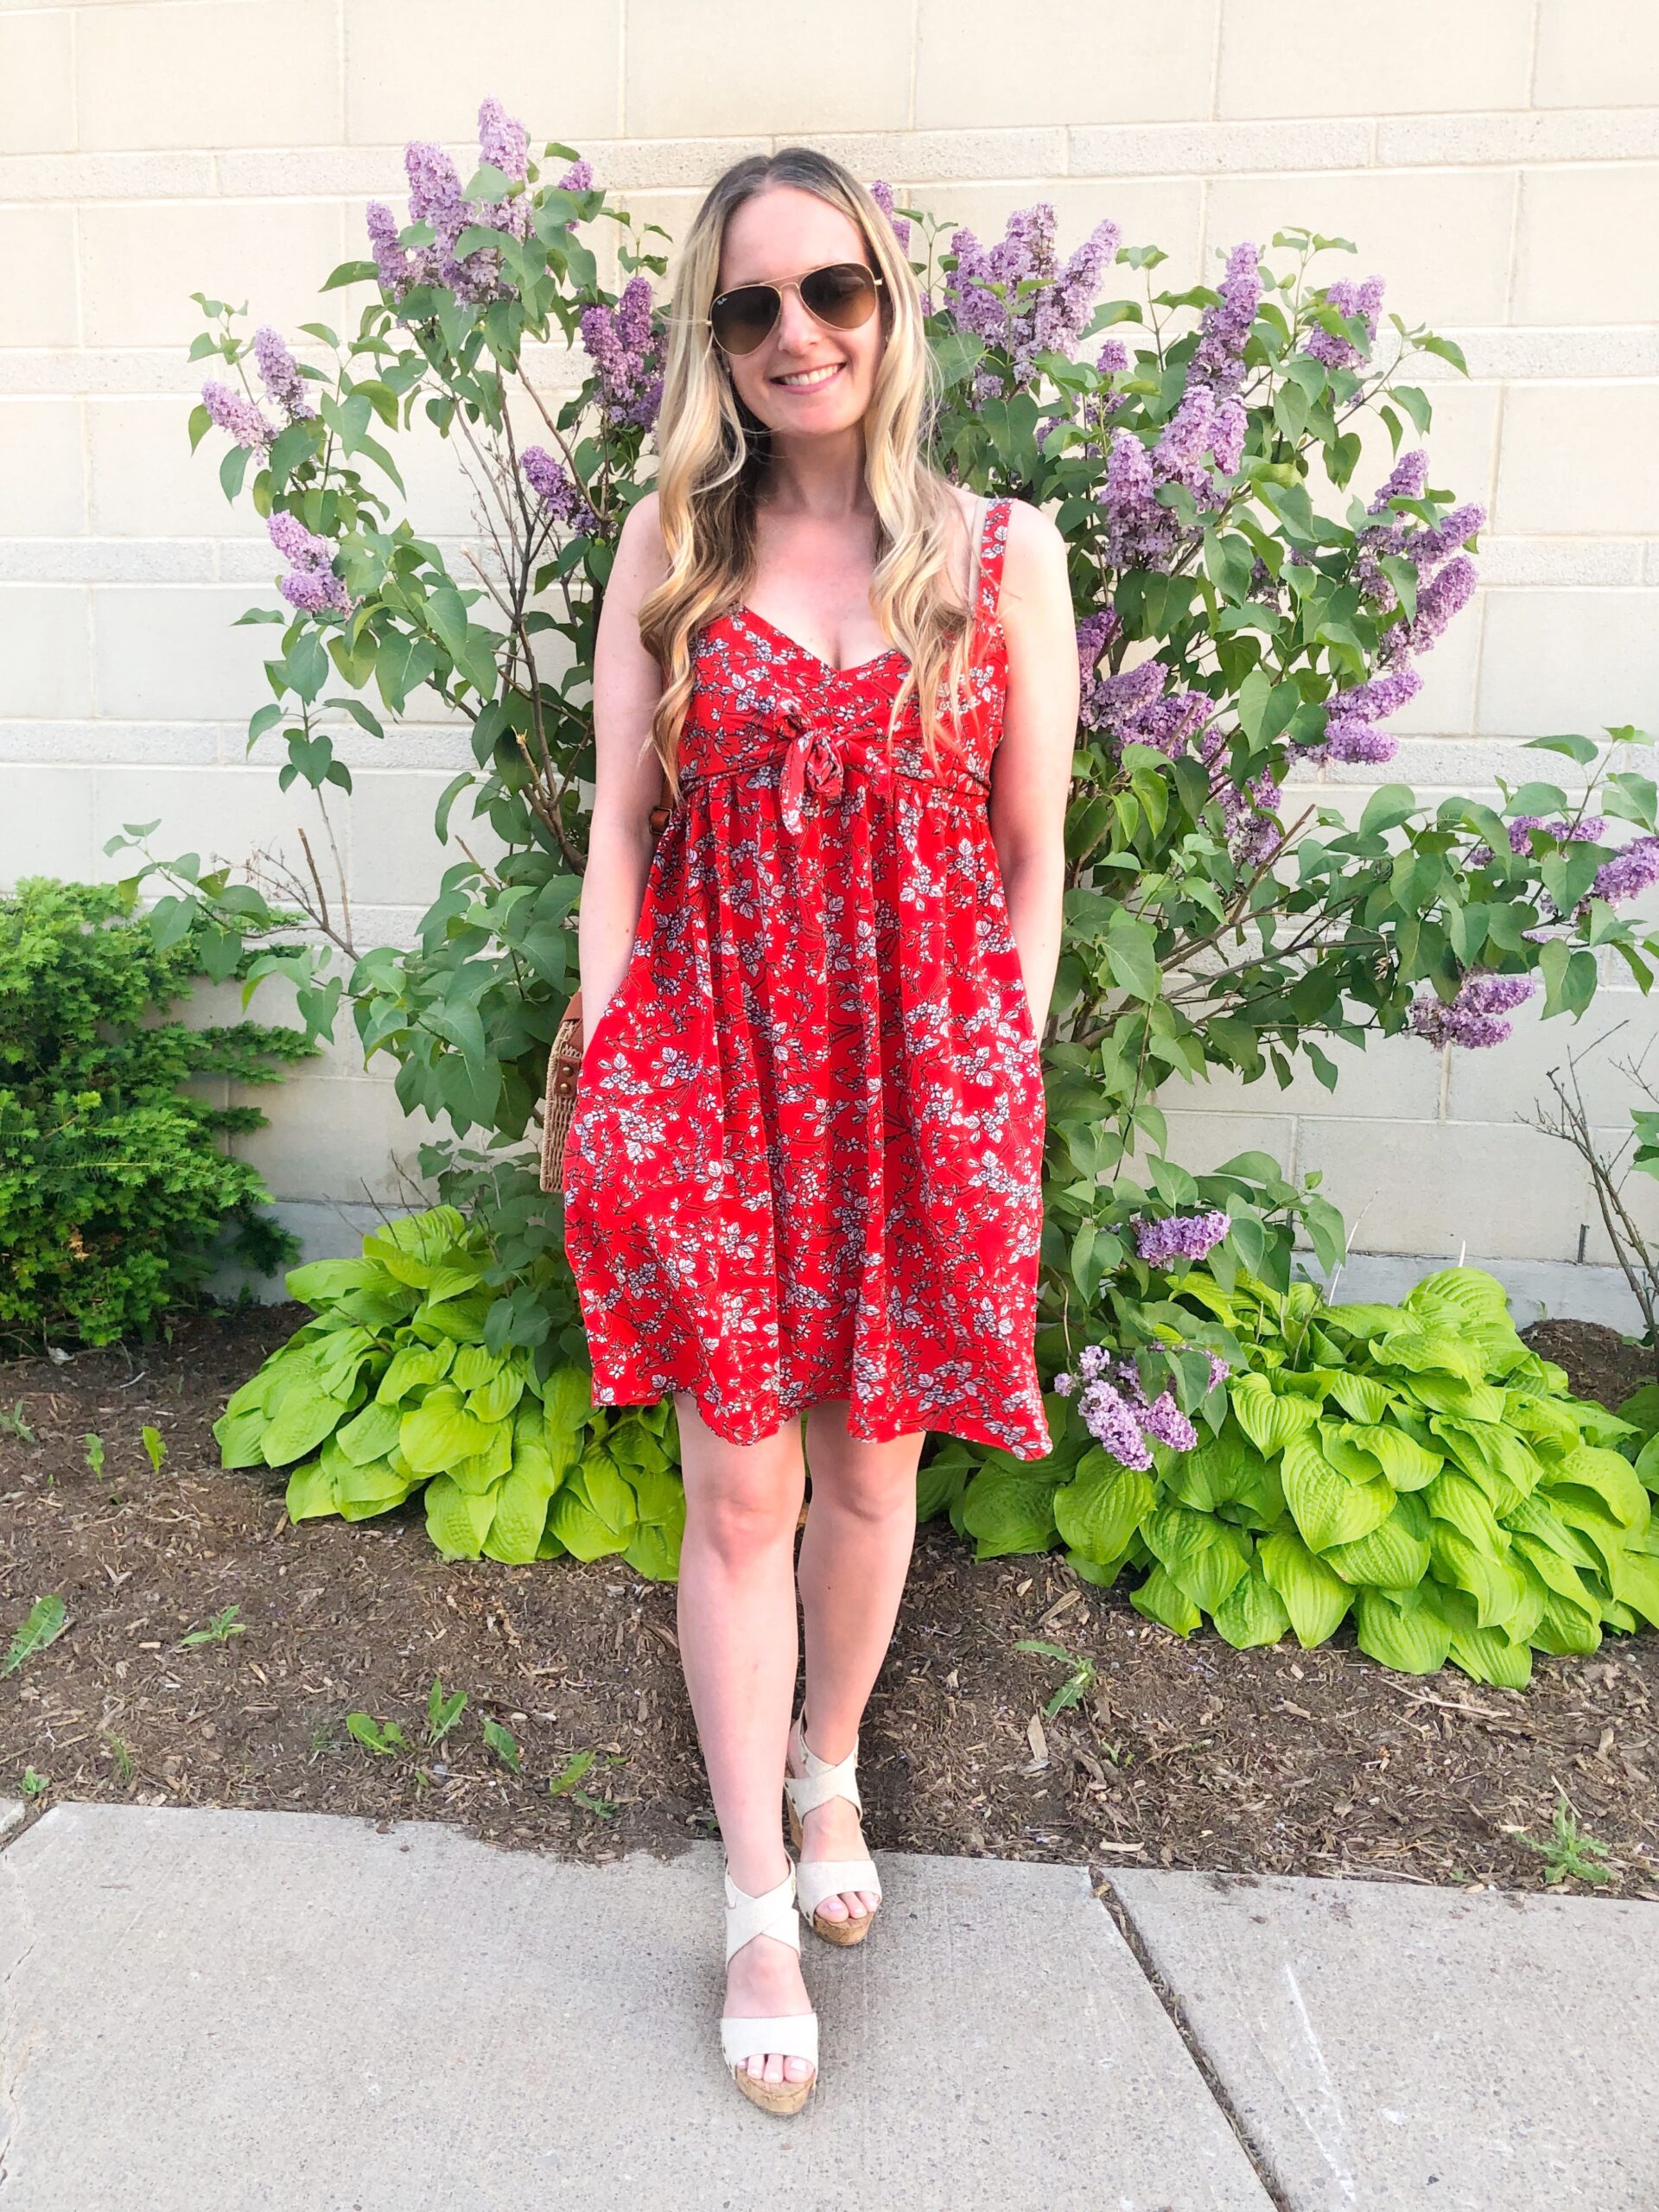 Red Dress with Pockets from Shein on Livin' Life with Style 